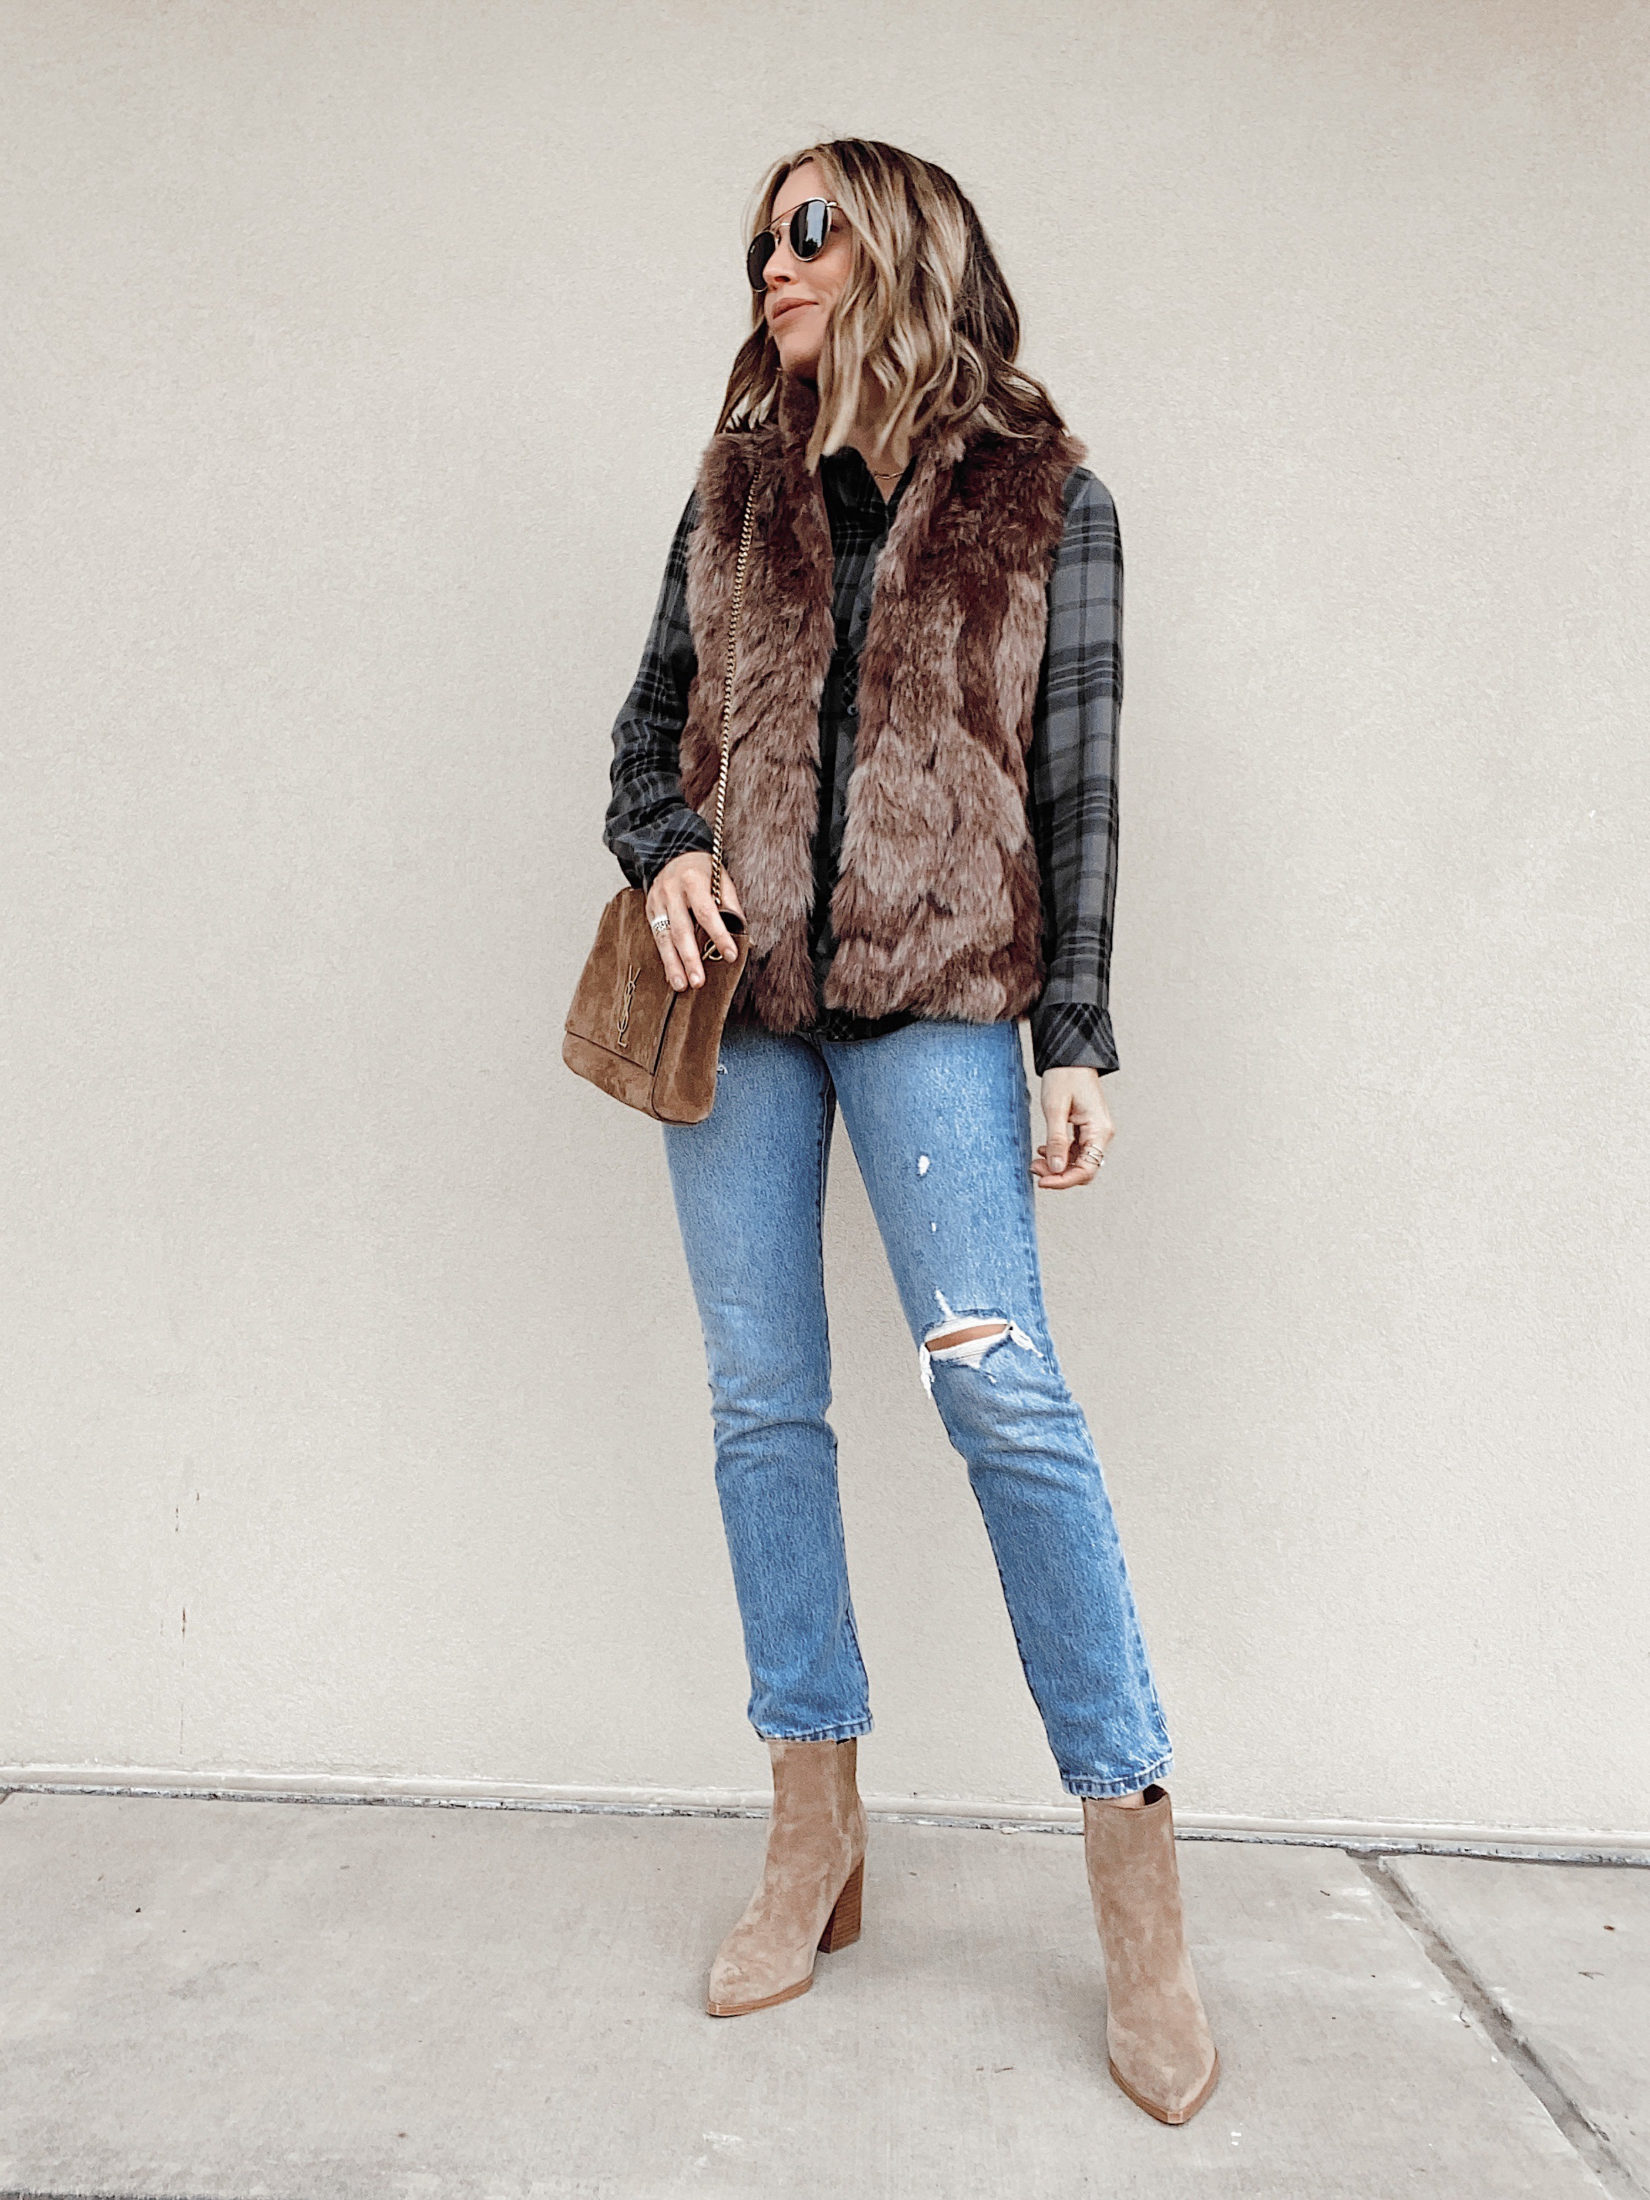 jaime shrayber wearing plaid shirt with brown faux fur vest outfit